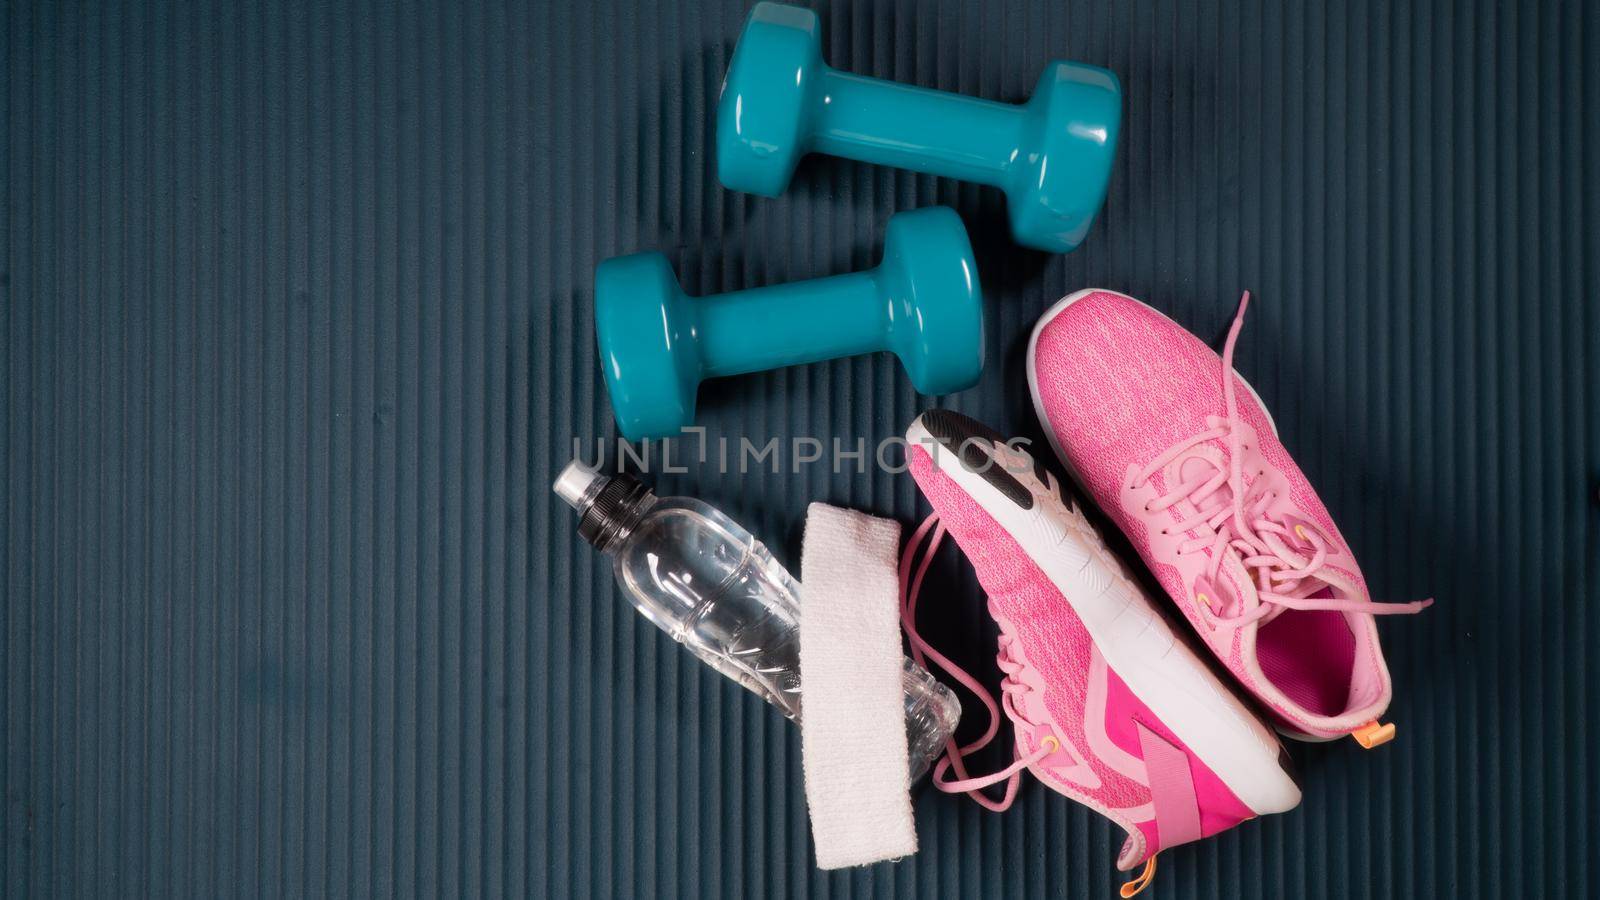 Gym workout kit - dumbbells with sneakers, bottle of water, towel and Buff by voktybre